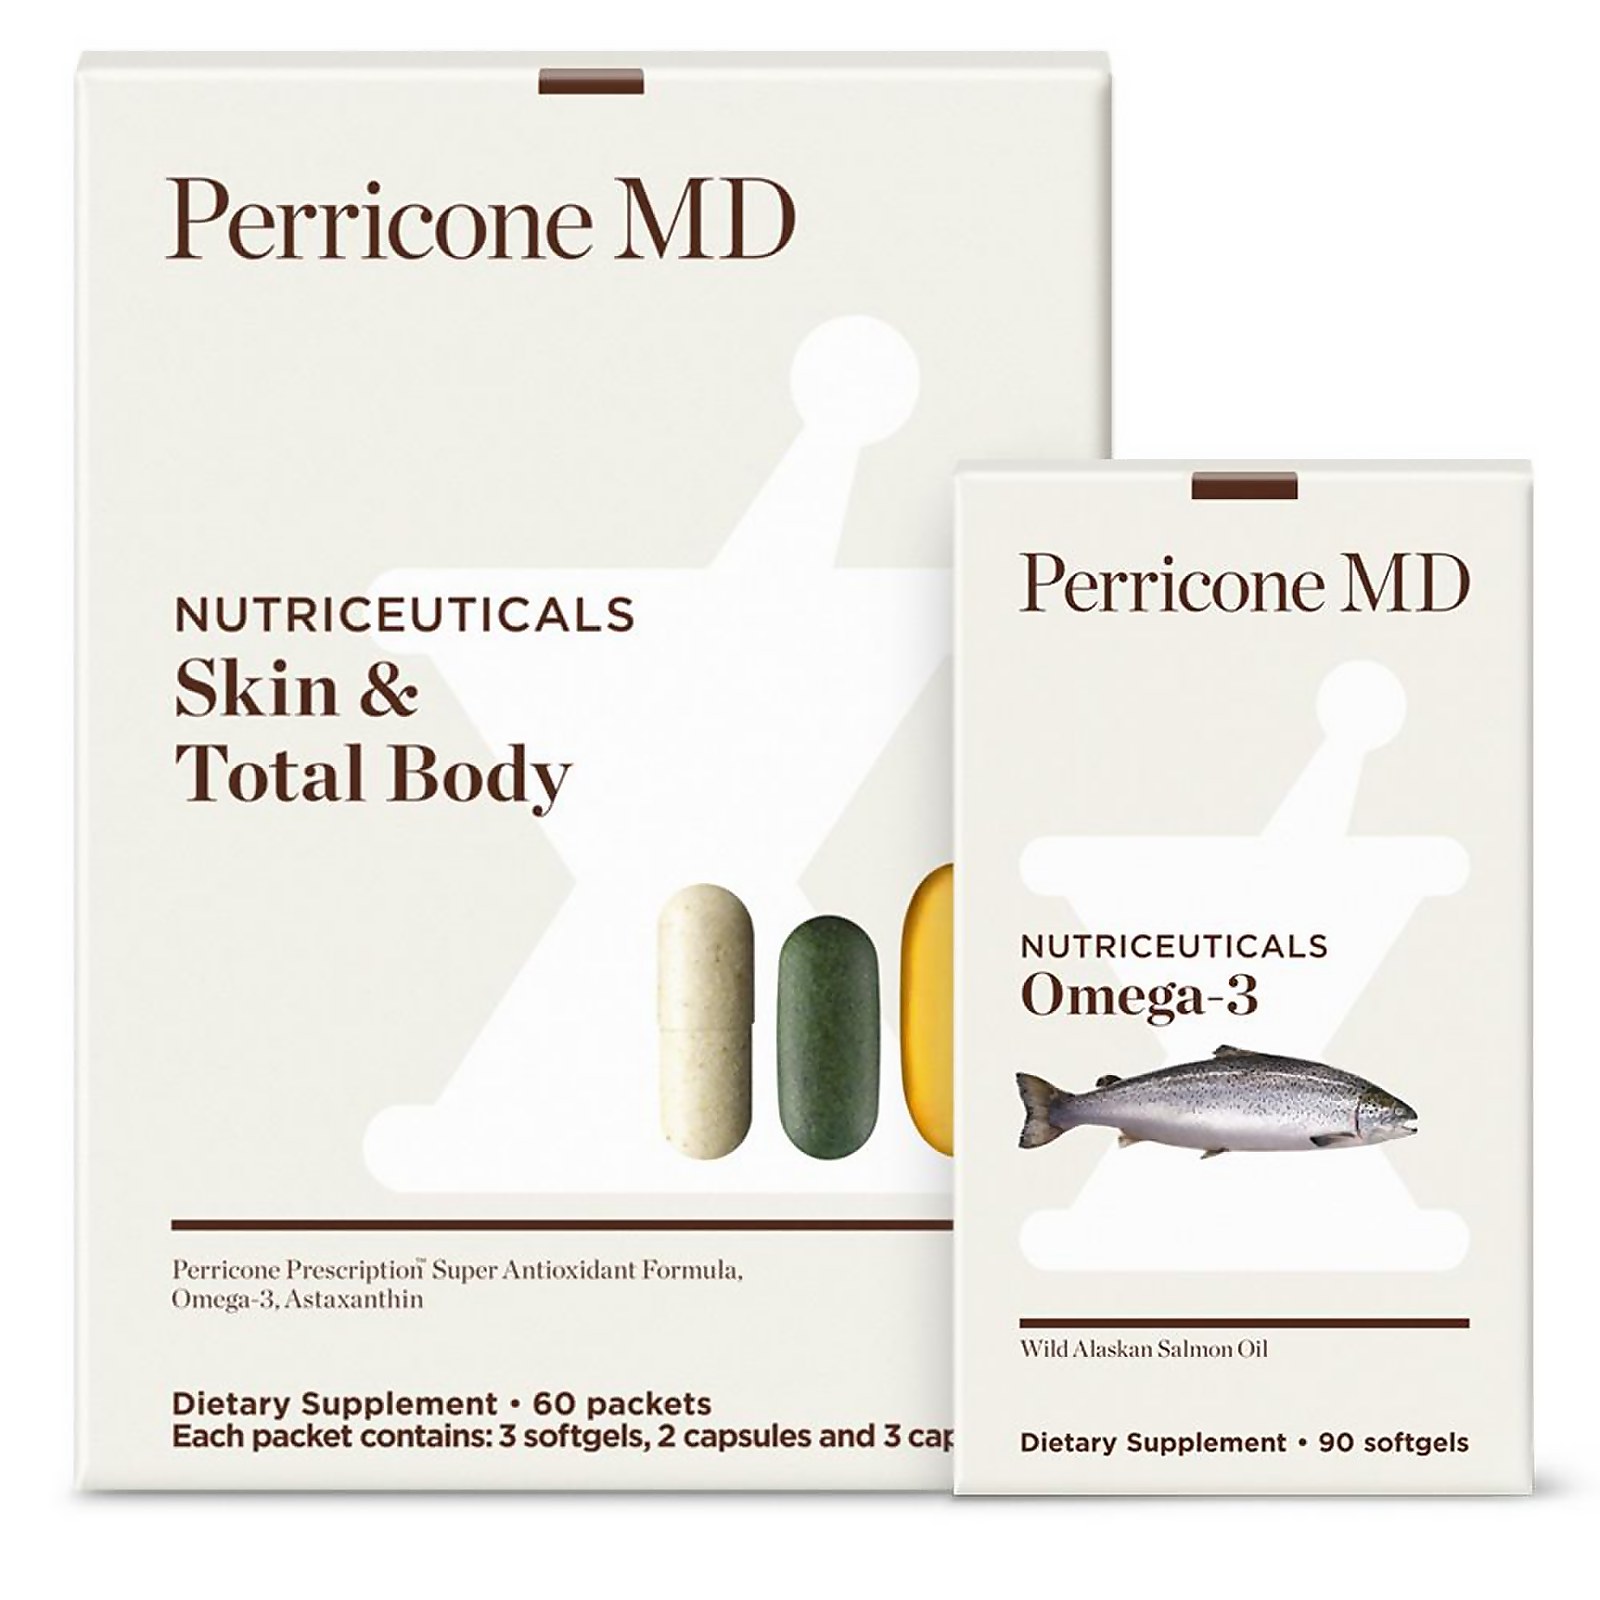 Perricone Md Beauty From The Inside Out